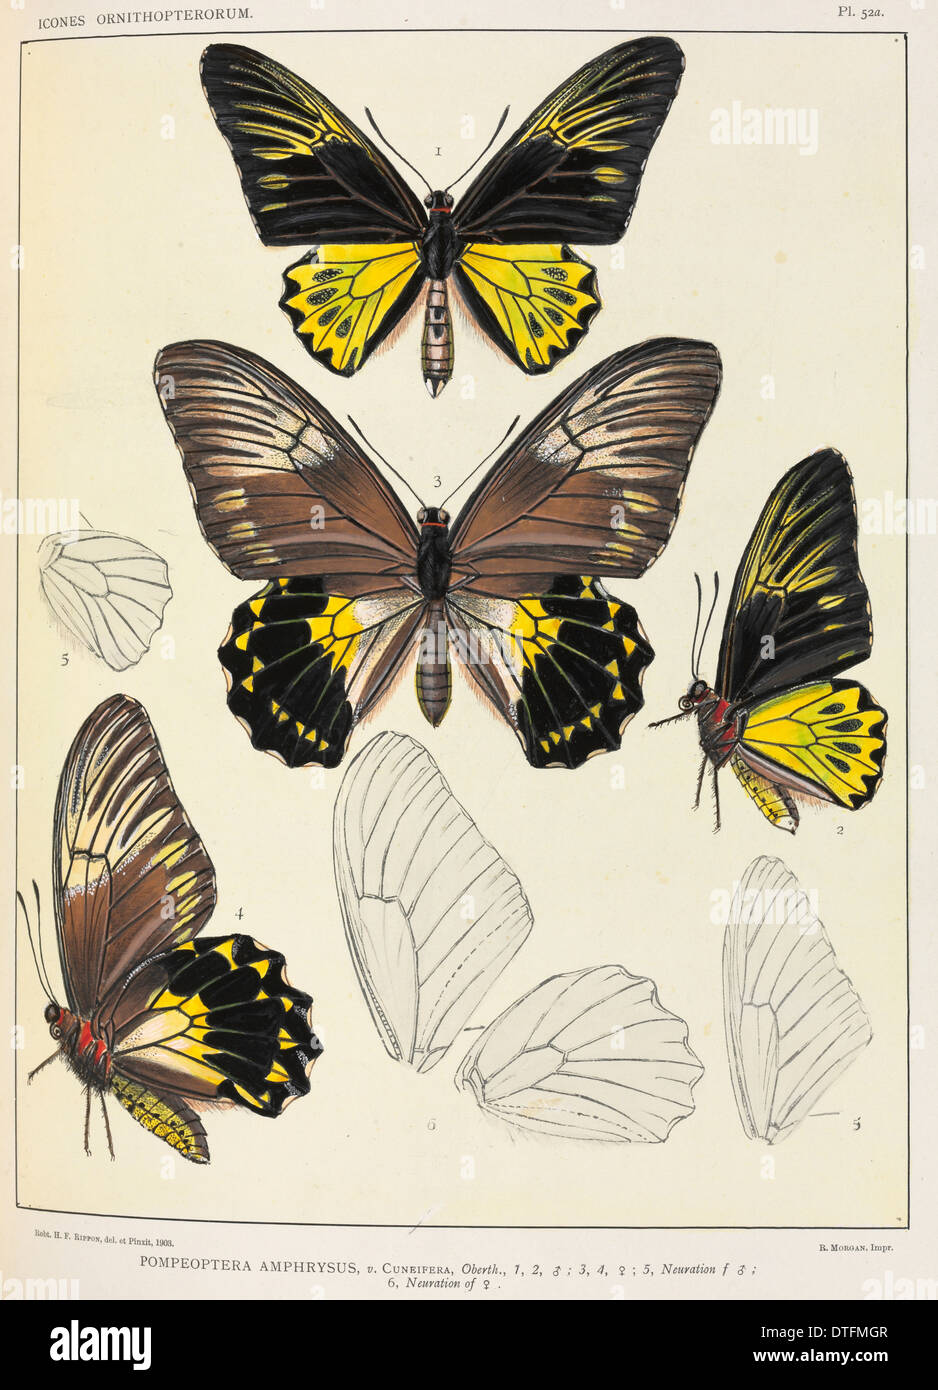 Icones Ornithopterorum by Robert Rippon,1816-1917. Stock Photo